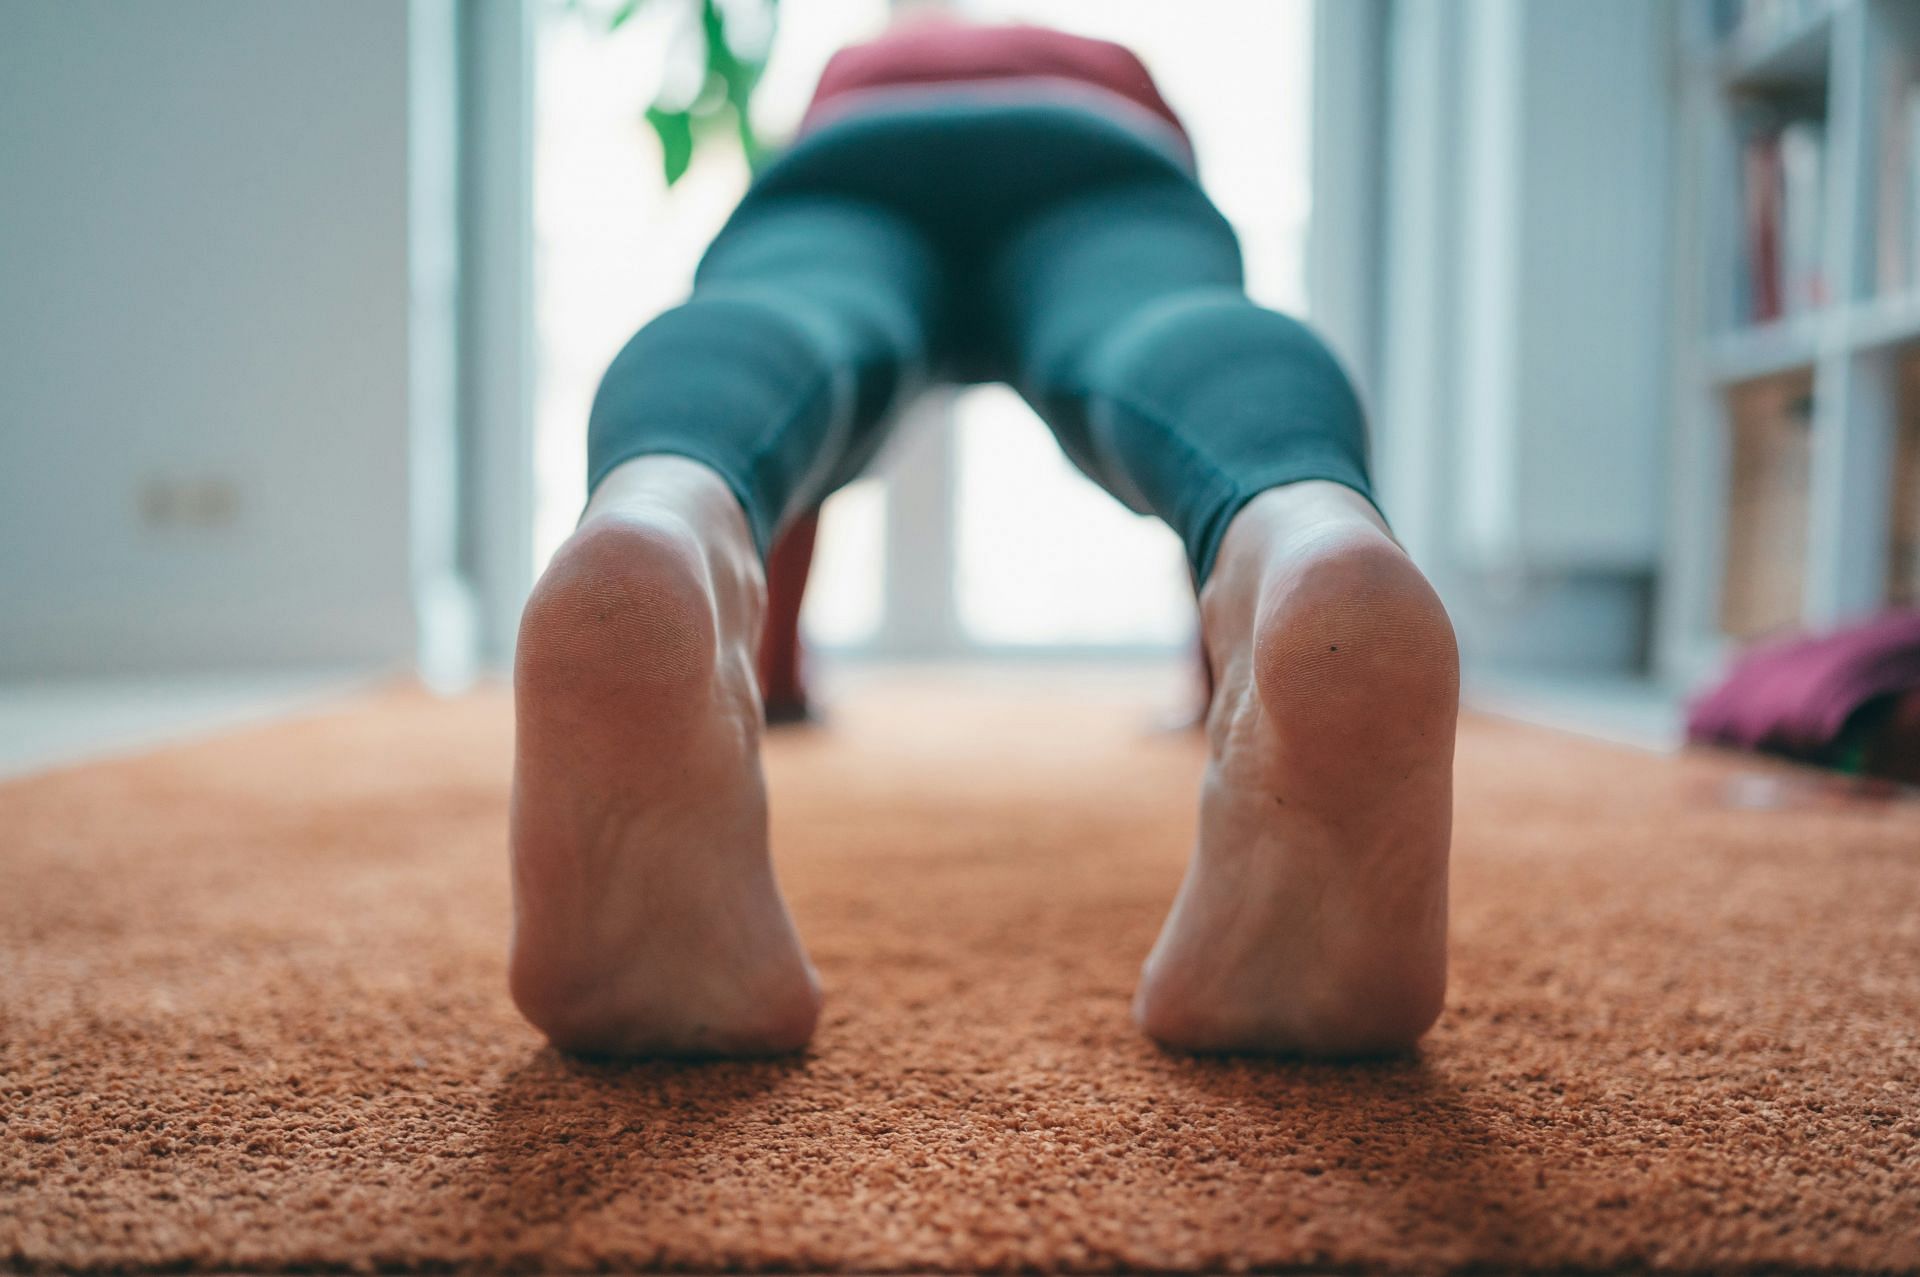 Planking to get to the push-up position (Image by Conscious Design/Unsplash)